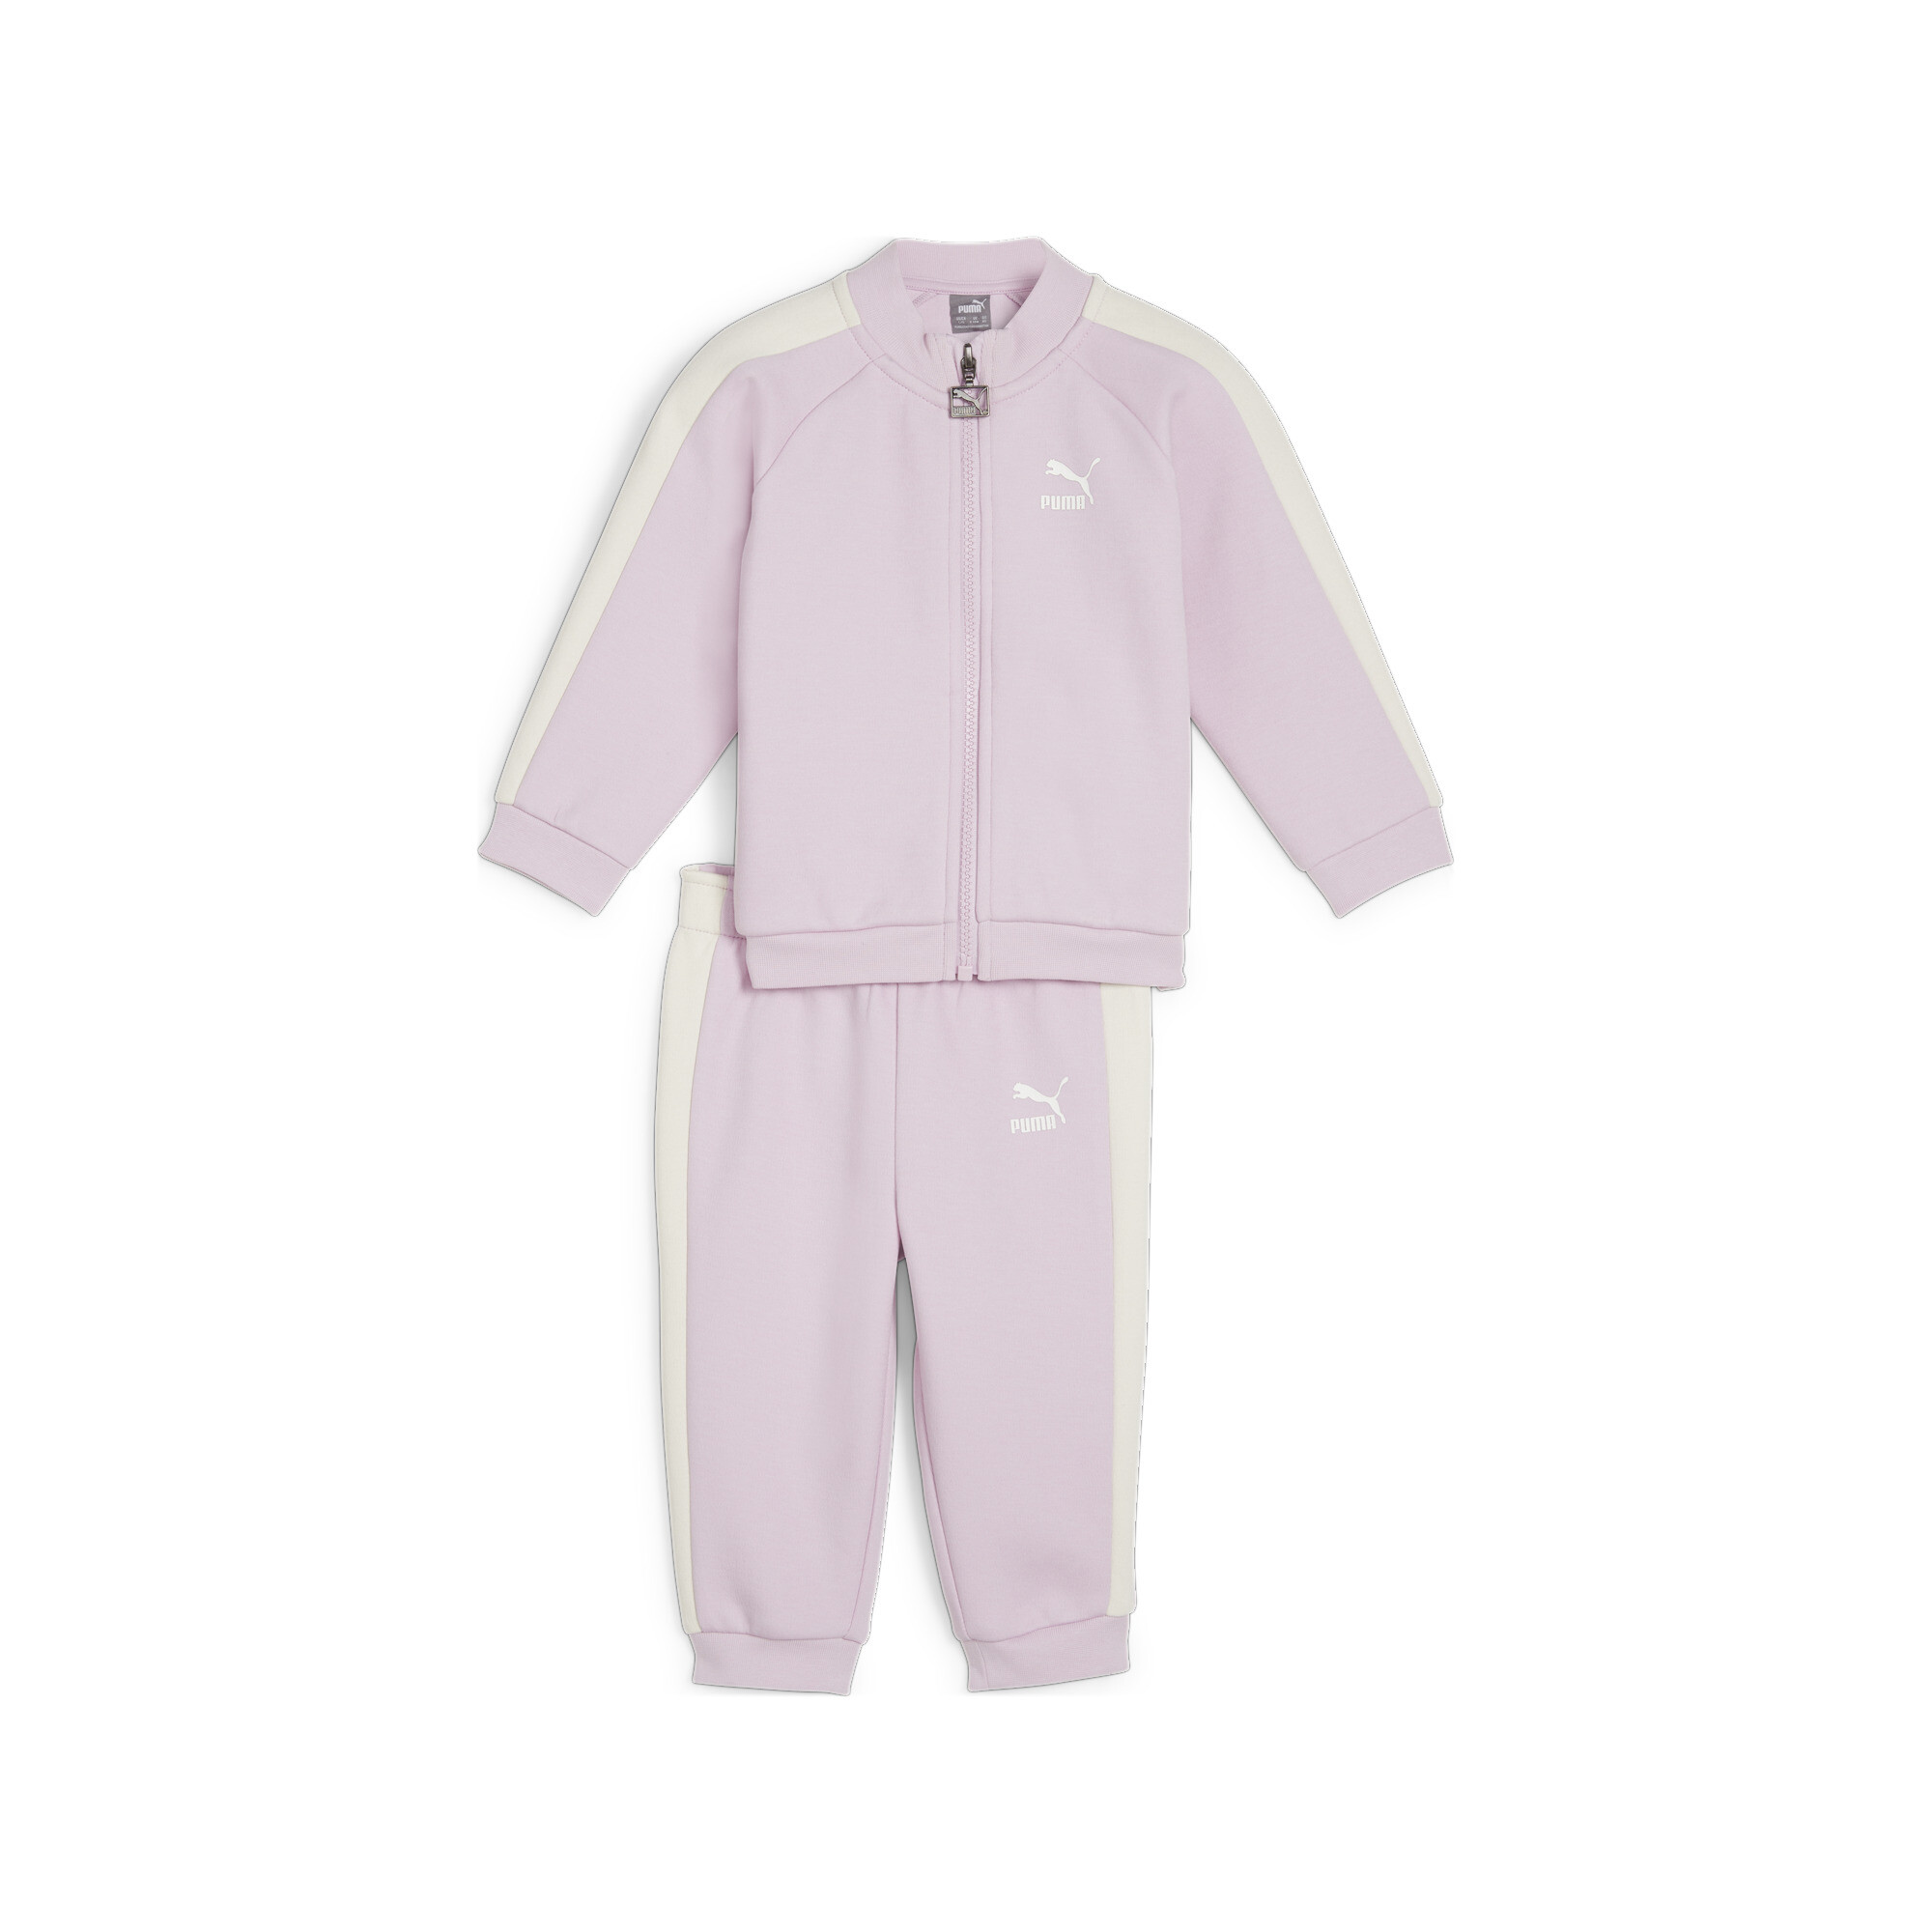 Kids' PUMA MINICATS T7 ICONIC Baby Tracksuit Set In 90 - Purple, Size 12-18 Months